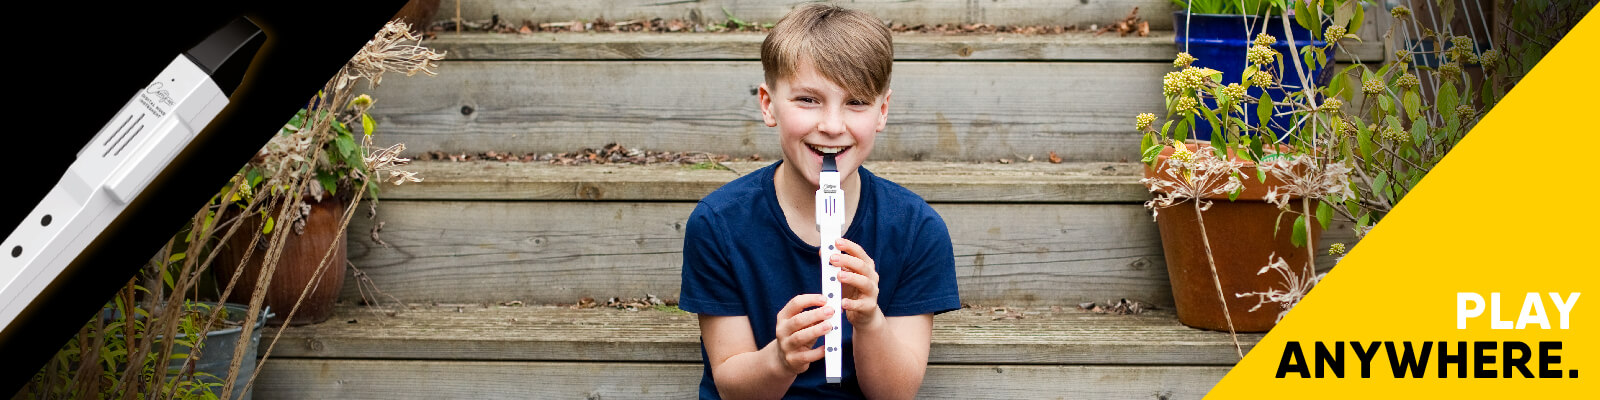 composite image of a child playing the Small Digital Wind Musical Instrument and text